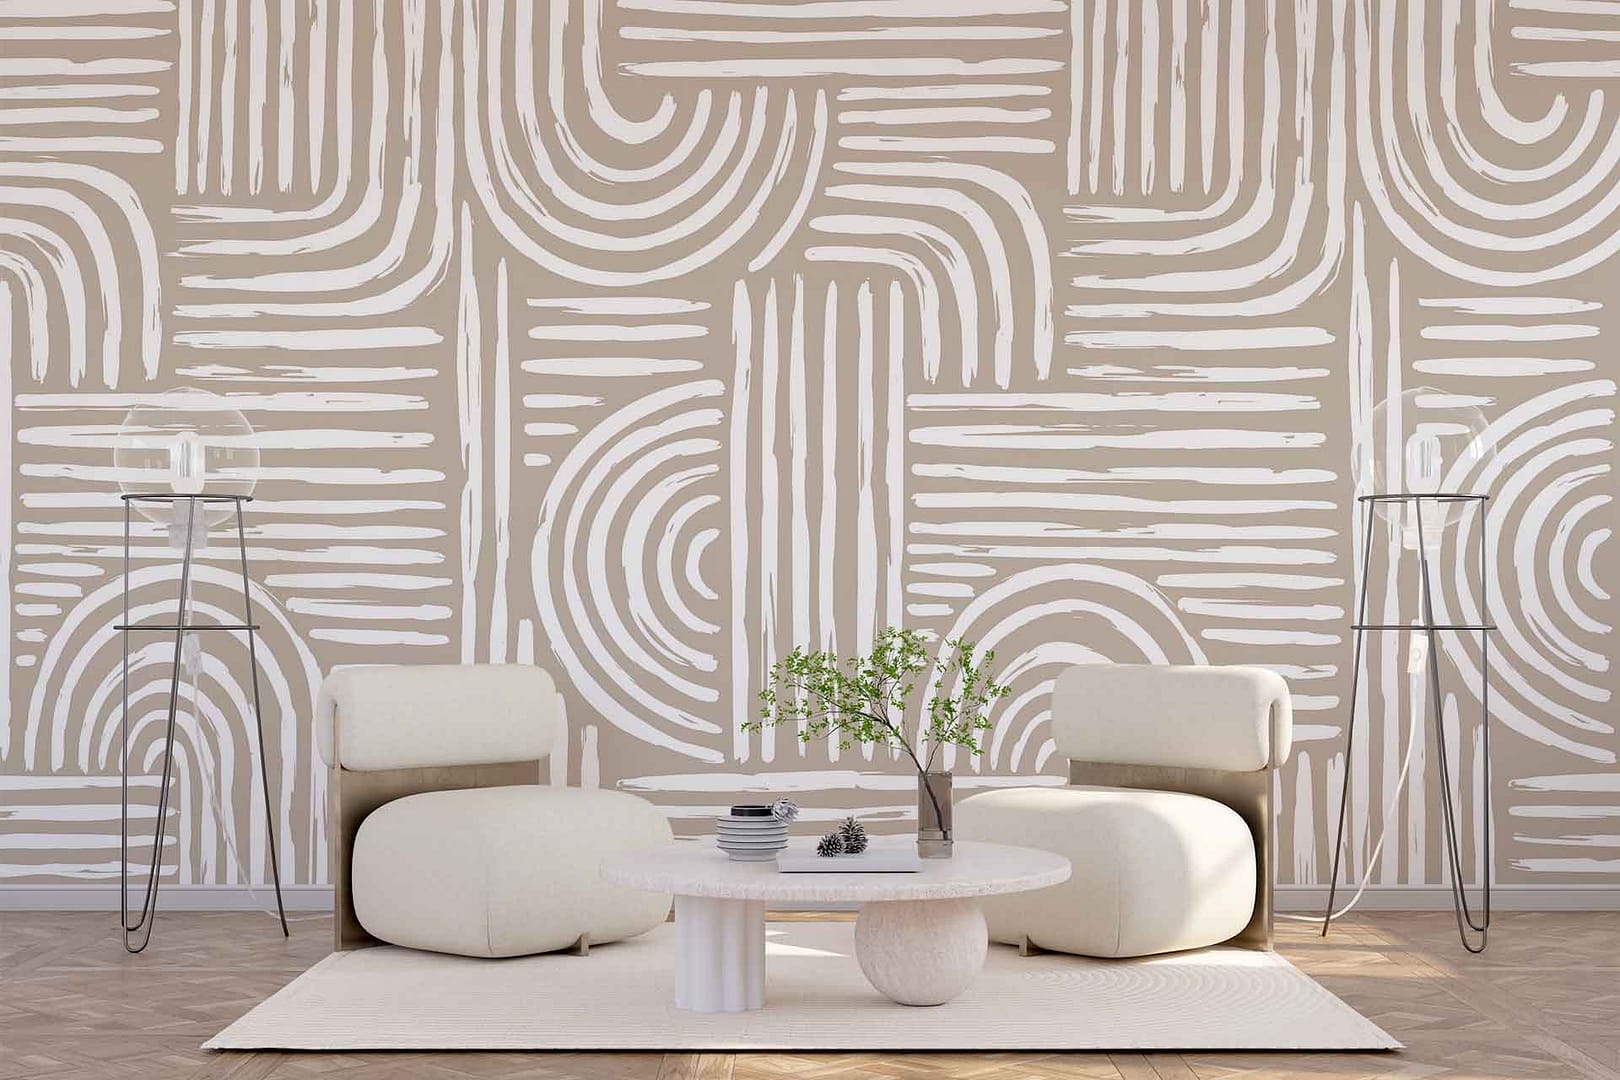 Back To Back - a wallpaper made up of various paint strokes on a solid background by Cara Saven Wall Design